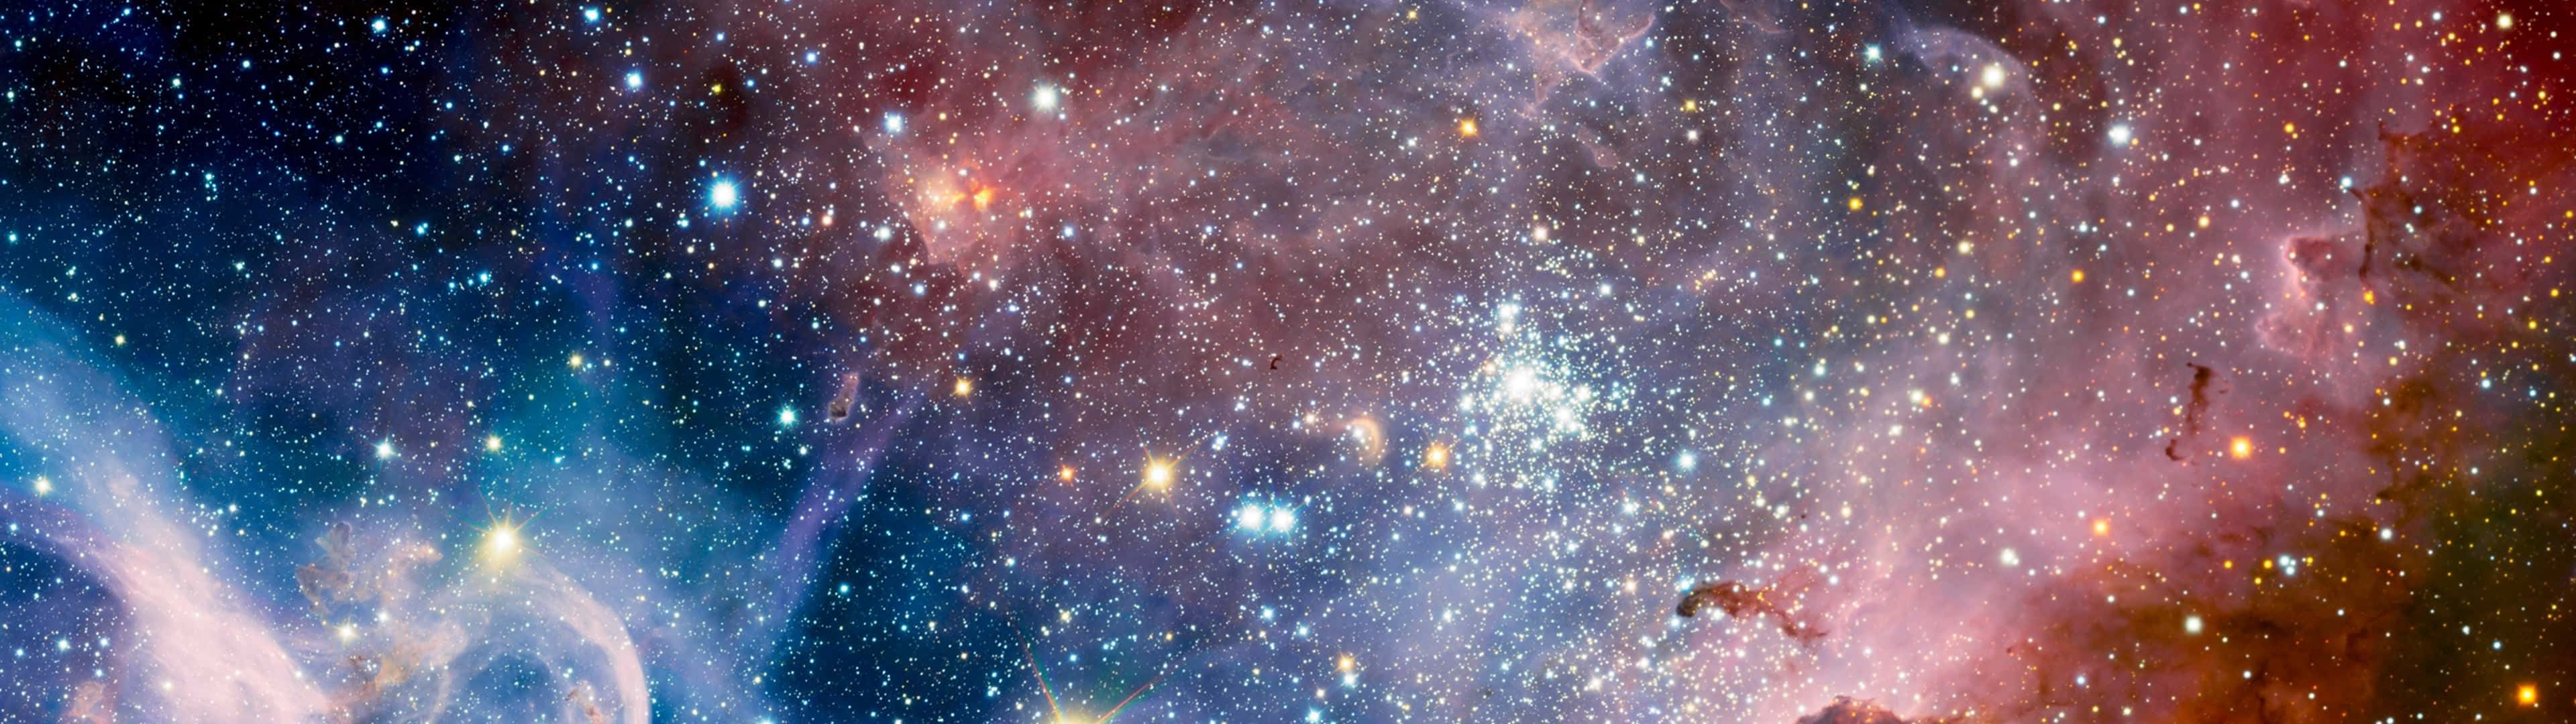 3840X1080 Red Blue Galaxy Picture